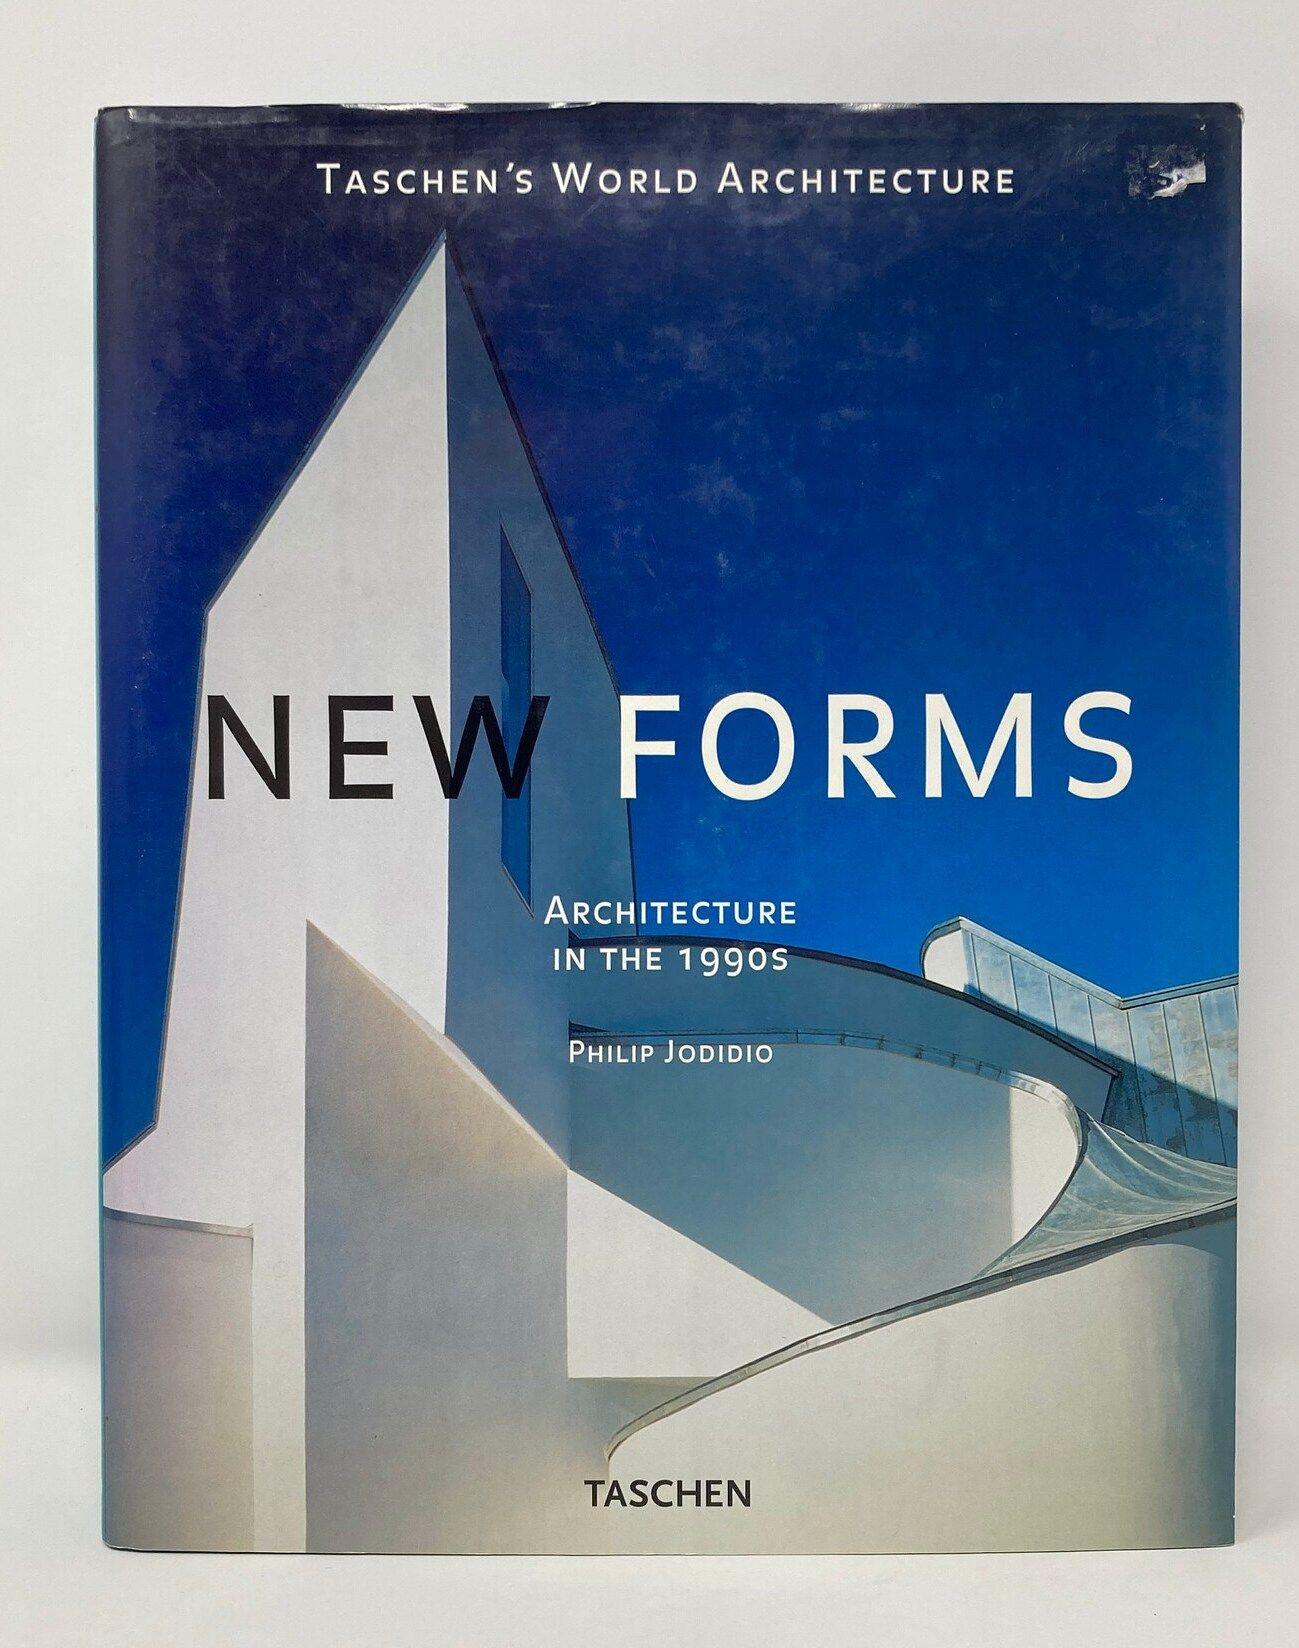 New Forms Architecture in The 1990s First Edition Hardcover 1997.This is the first edition hardcover book 